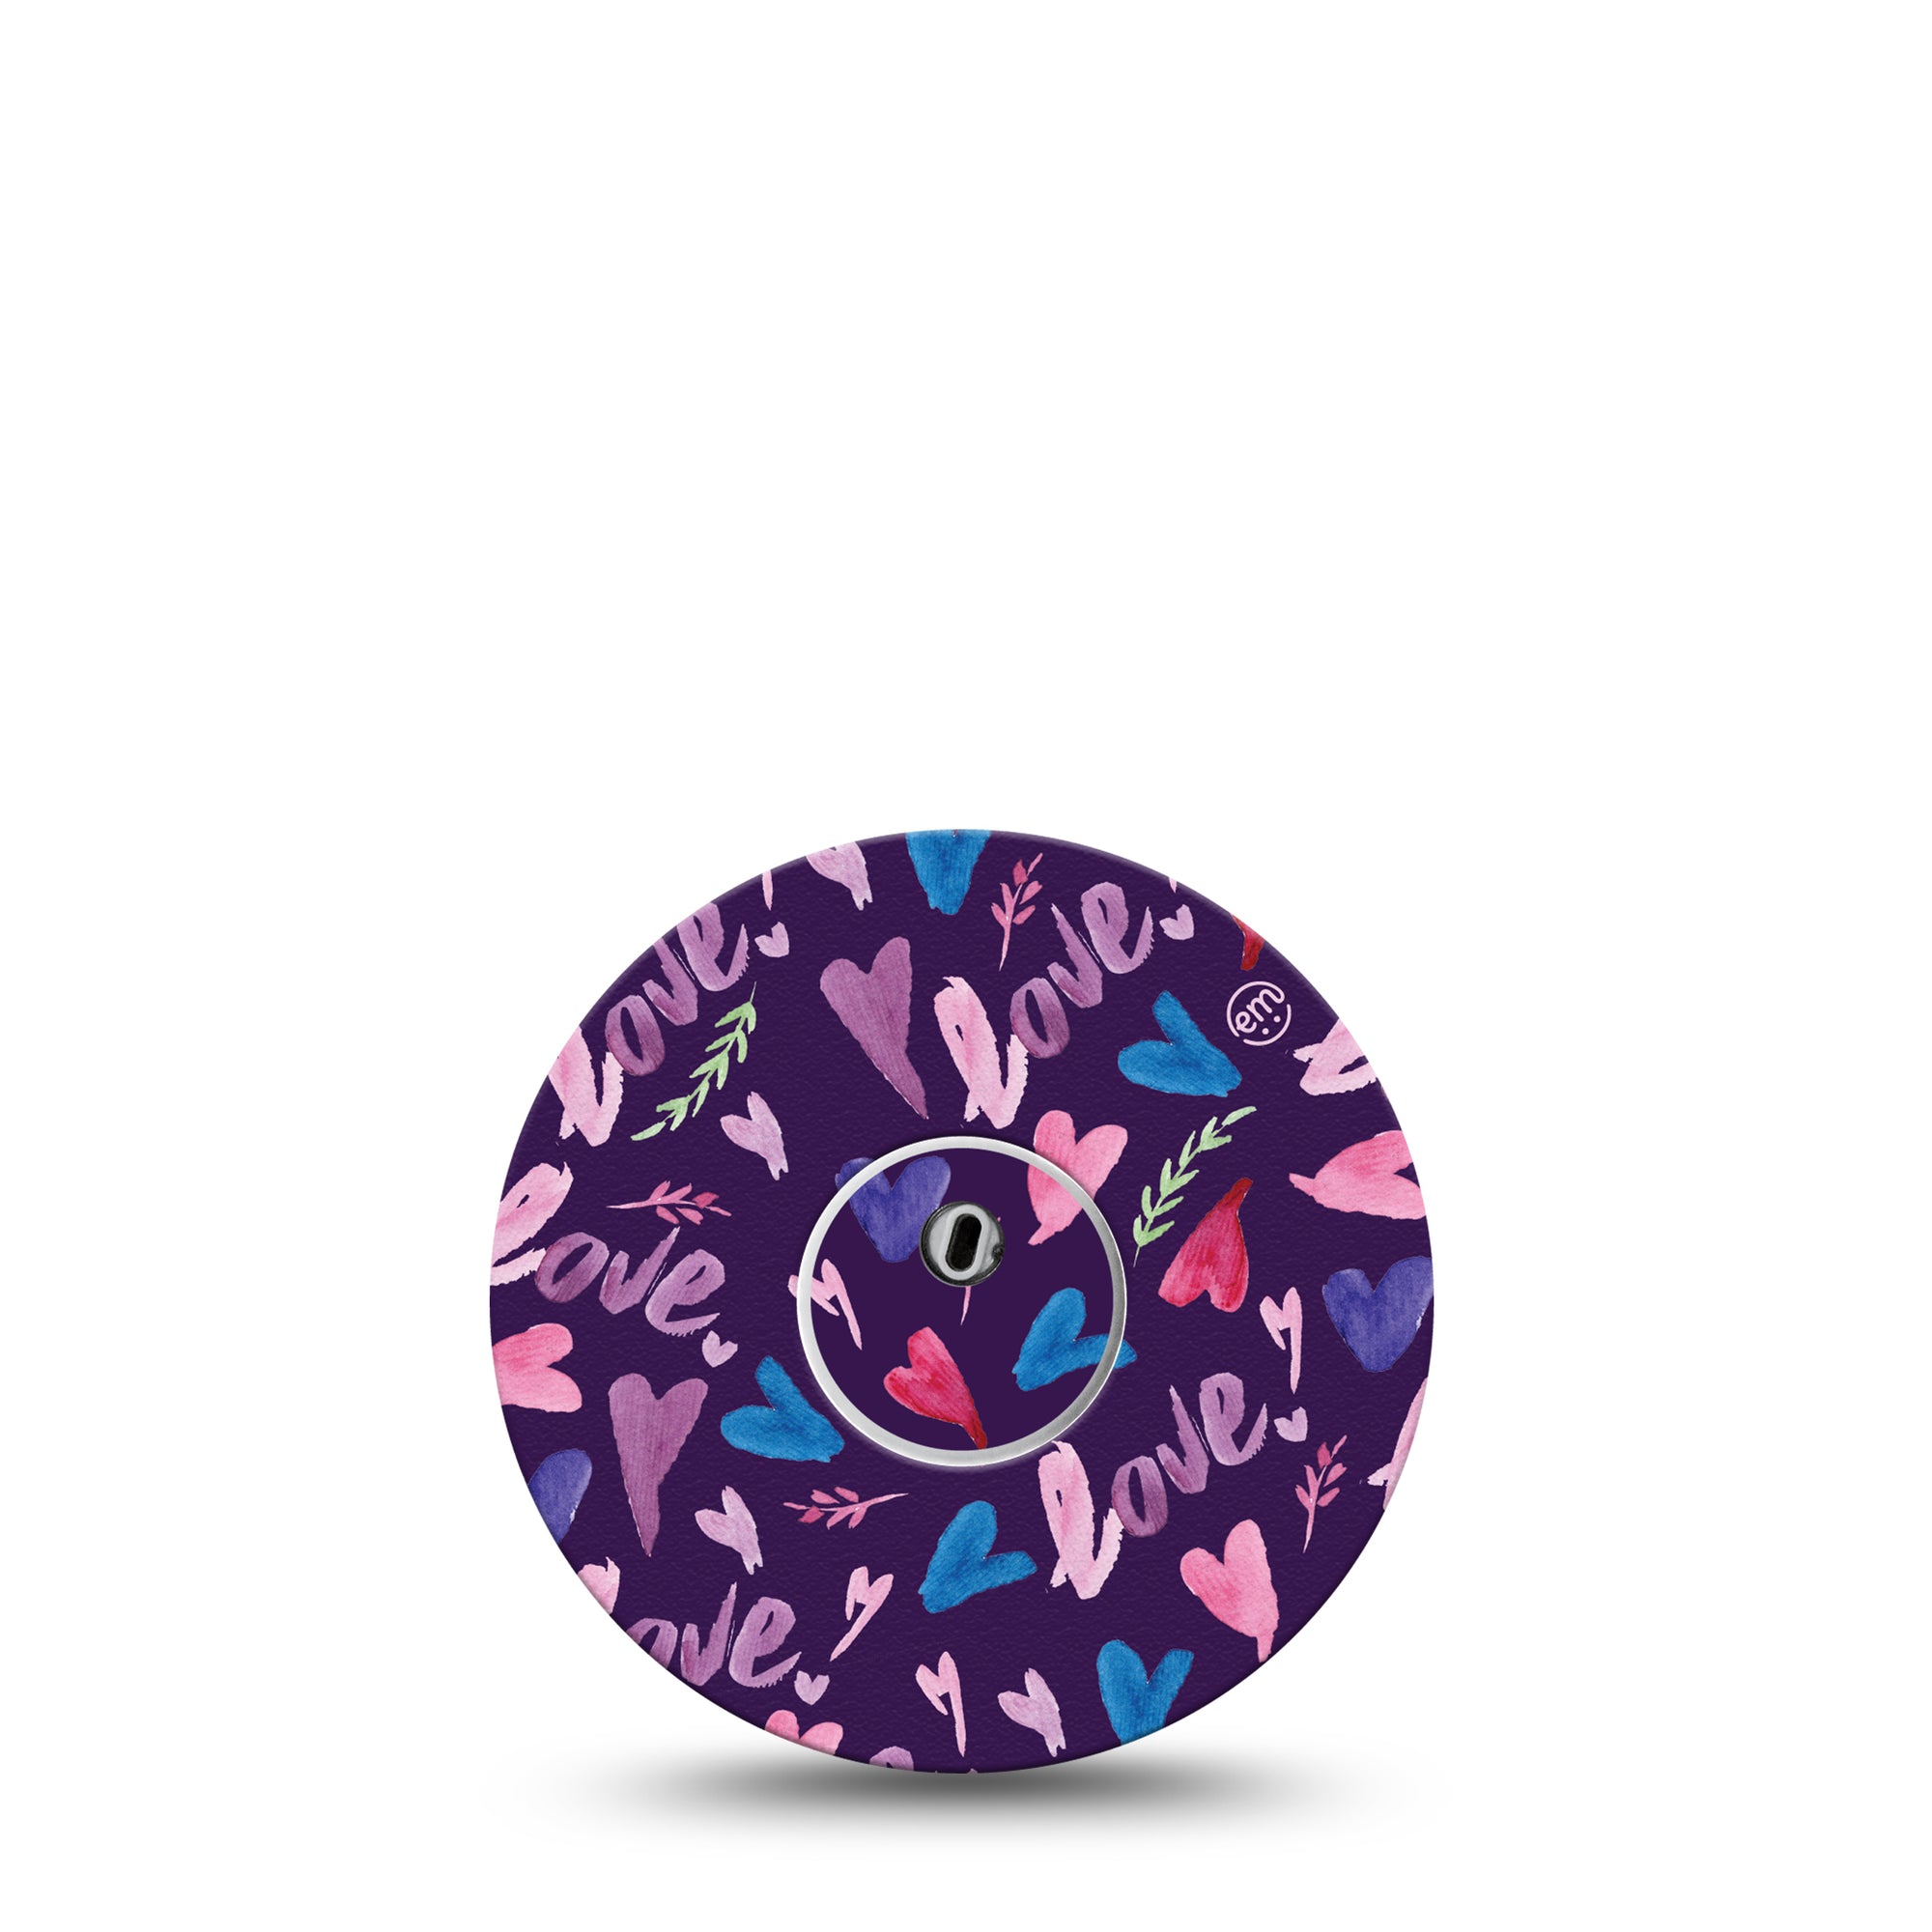 Watercolor Love Libre 3 Transmitter Sticker and matching Libre 3 Perfect Fit CGM Adhesive Tape